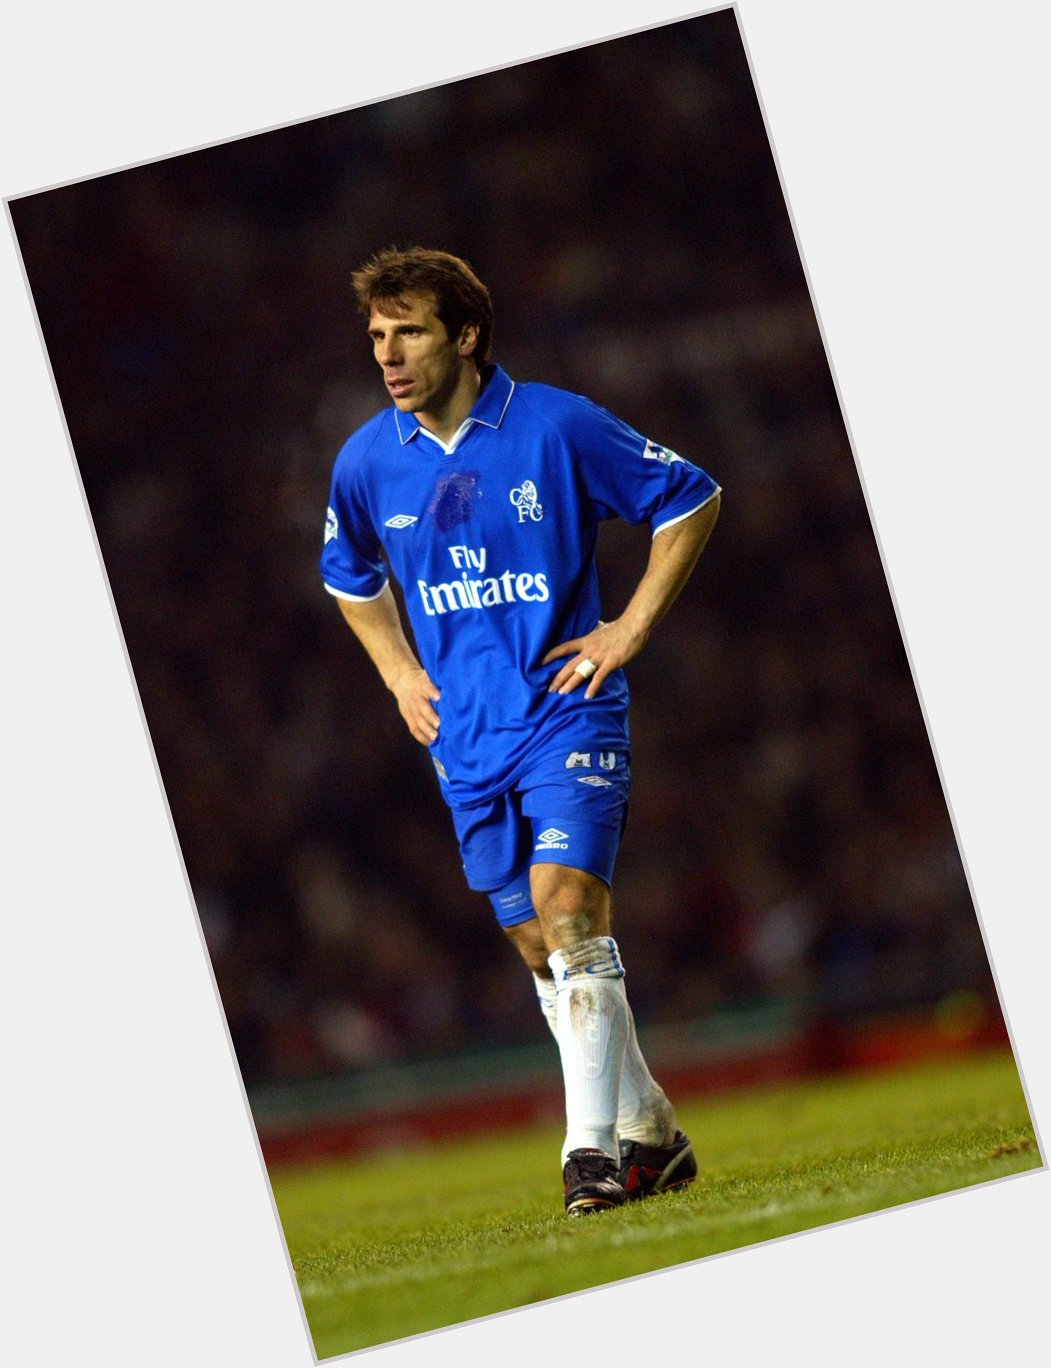 Happy Birthday Gianfranco Zola!

229 Premier League apps
59 Goals 
42 Assists 

What a player 